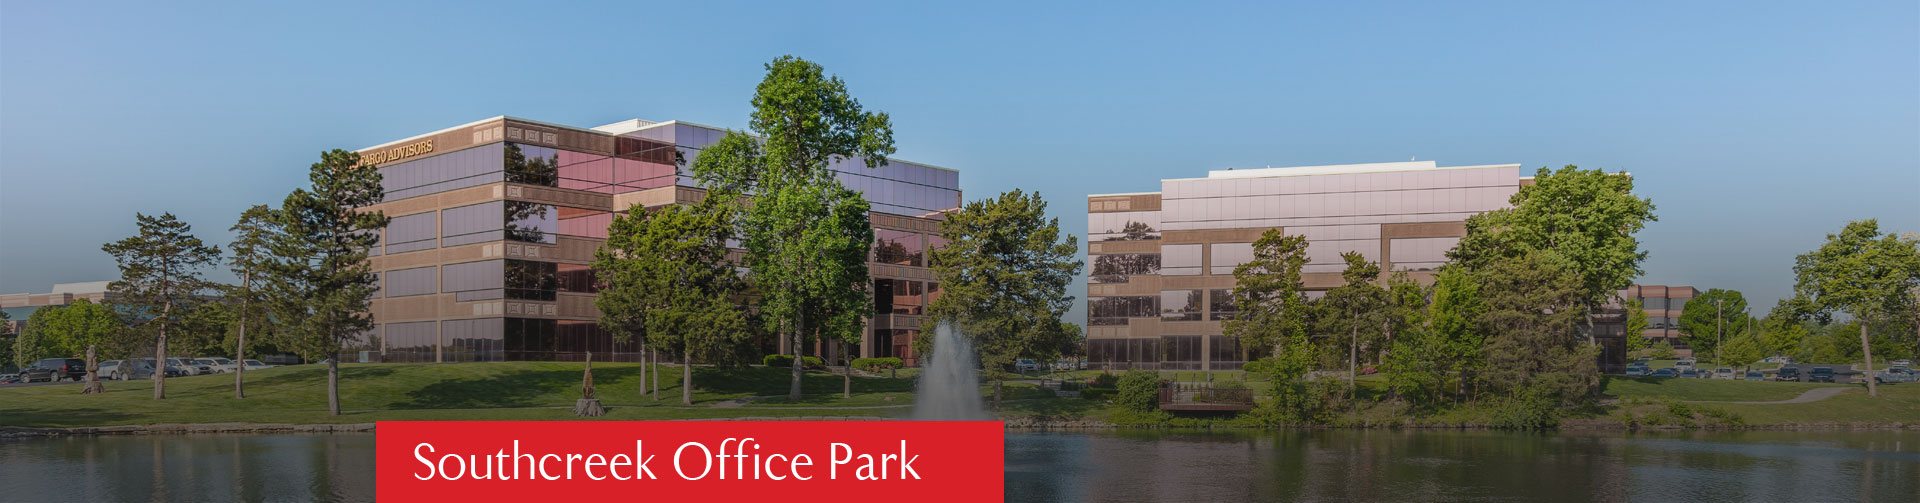 Kansas City Office Space | Office Space For Lease & Rent Overland Park